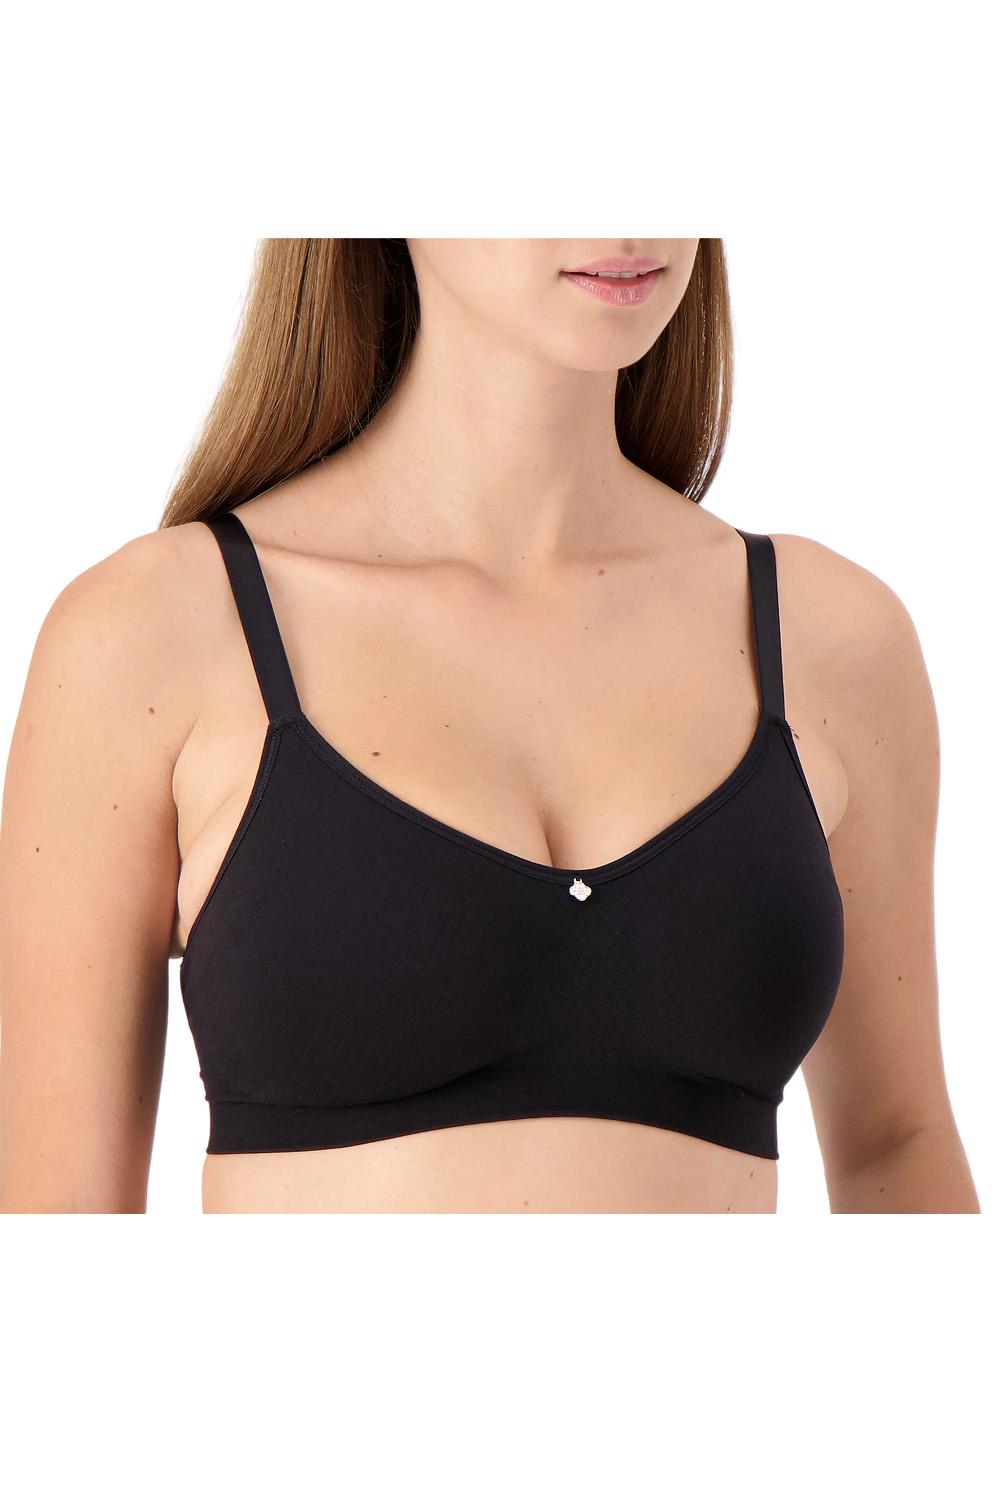 As Is Breezies Sleek Curves Wirefree Contour Bra 